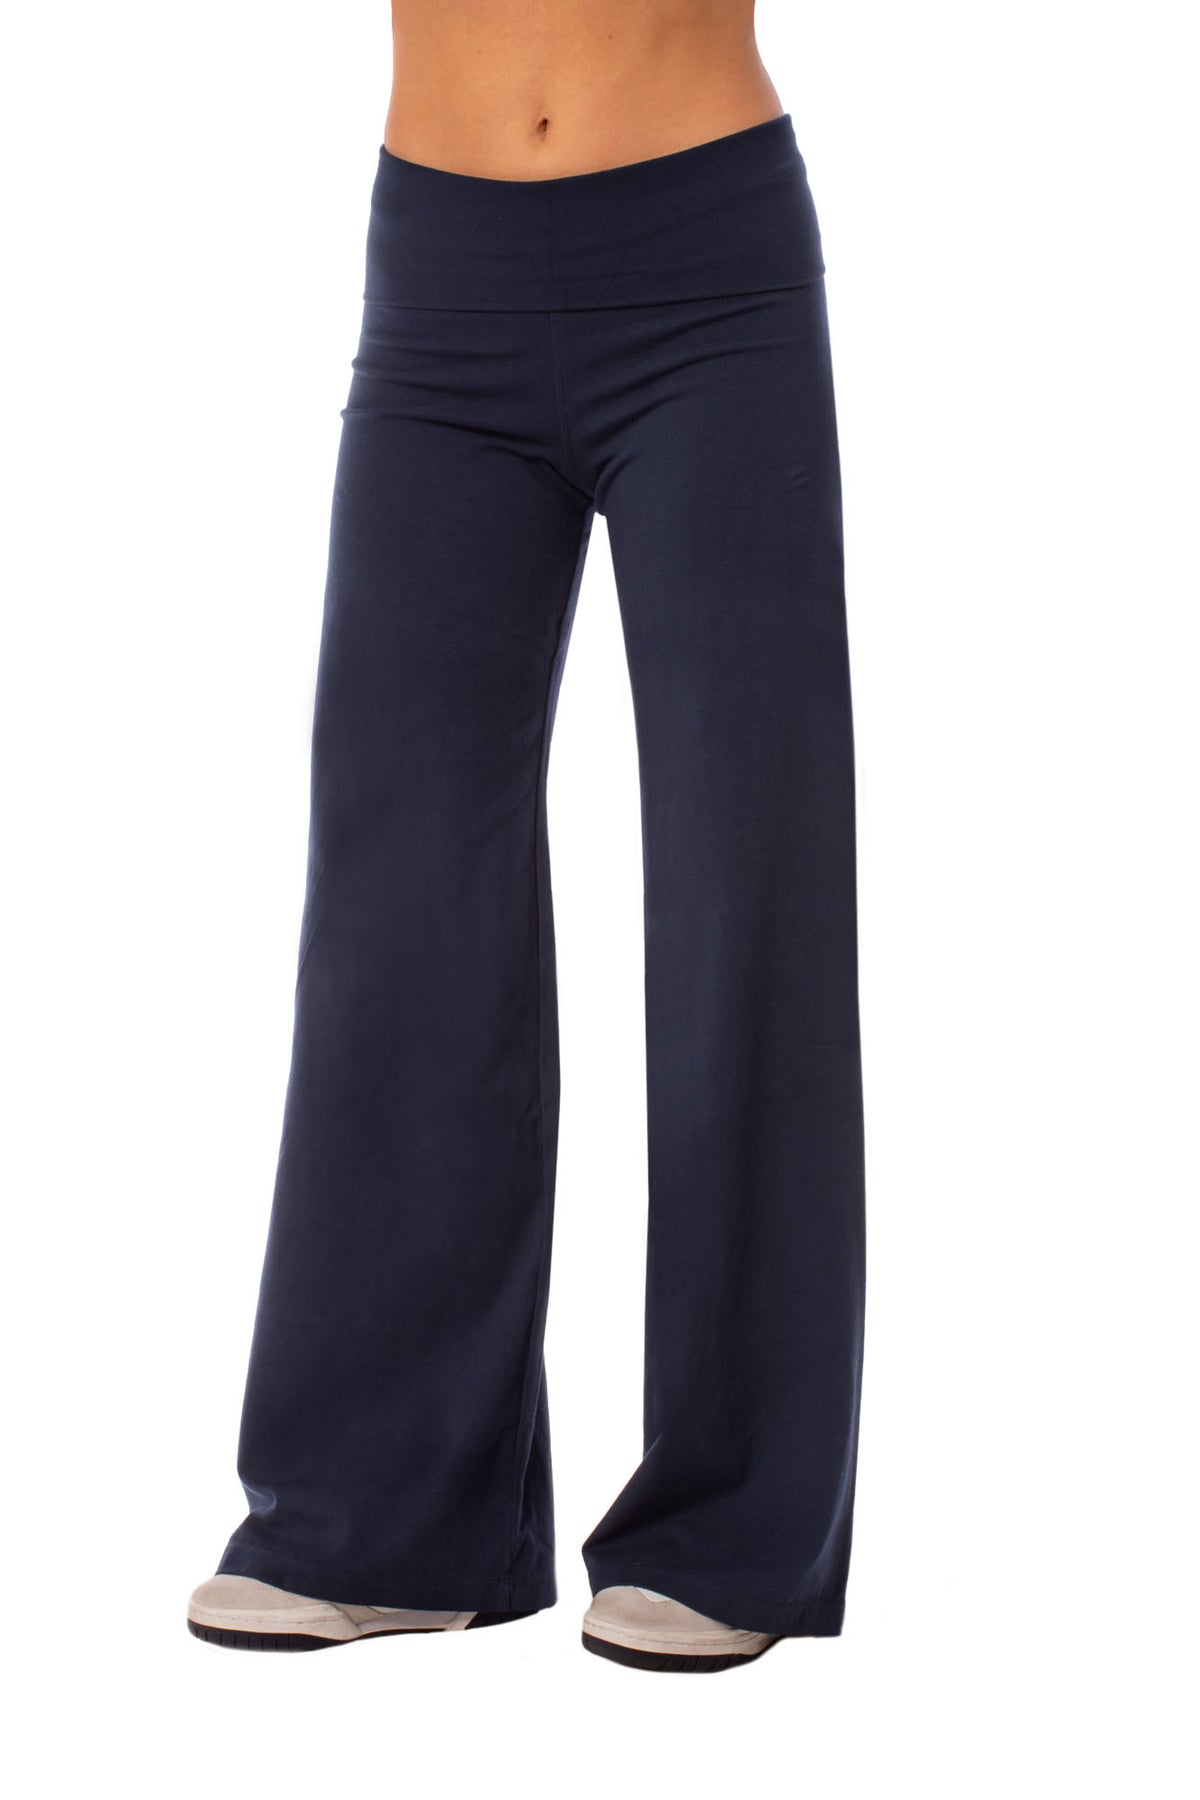 Hard Tail Women's Rolldown Bootleg Flare Pant Black XS at  Women's  Clothing store